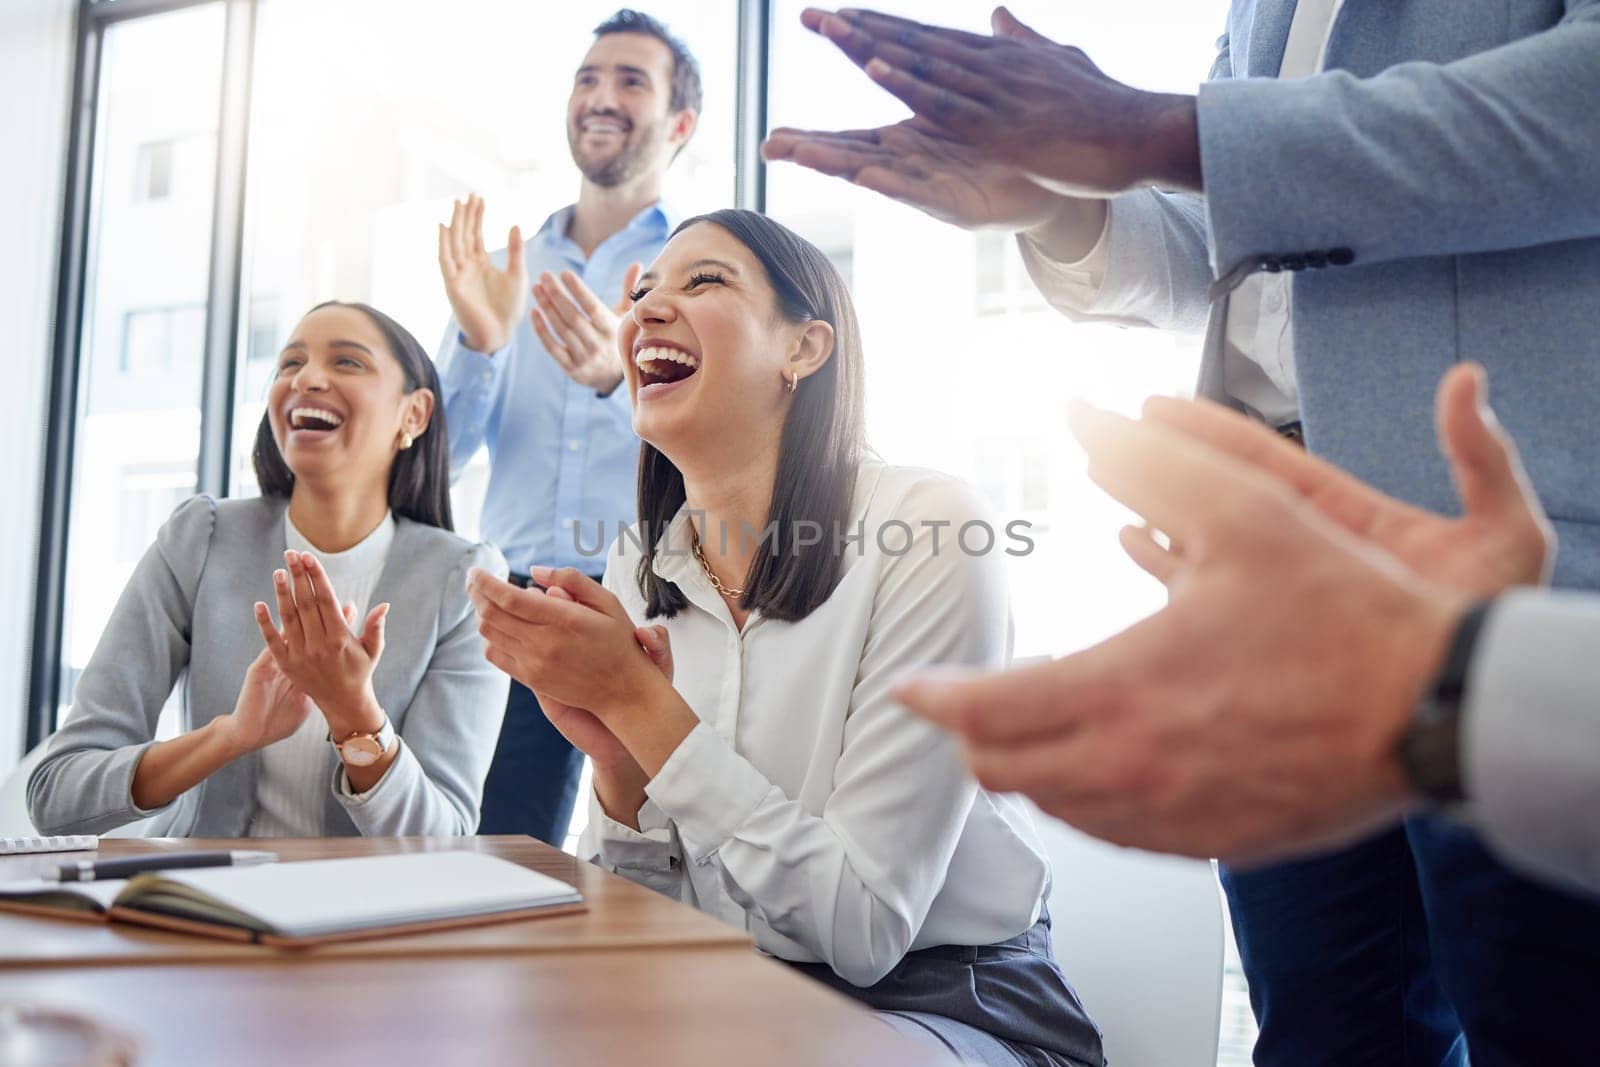 Motivation, audience with an applause and in a business meeting at work with a lens flare together. Support or celebration, success and colleagues clapping hands for good news or achievement.